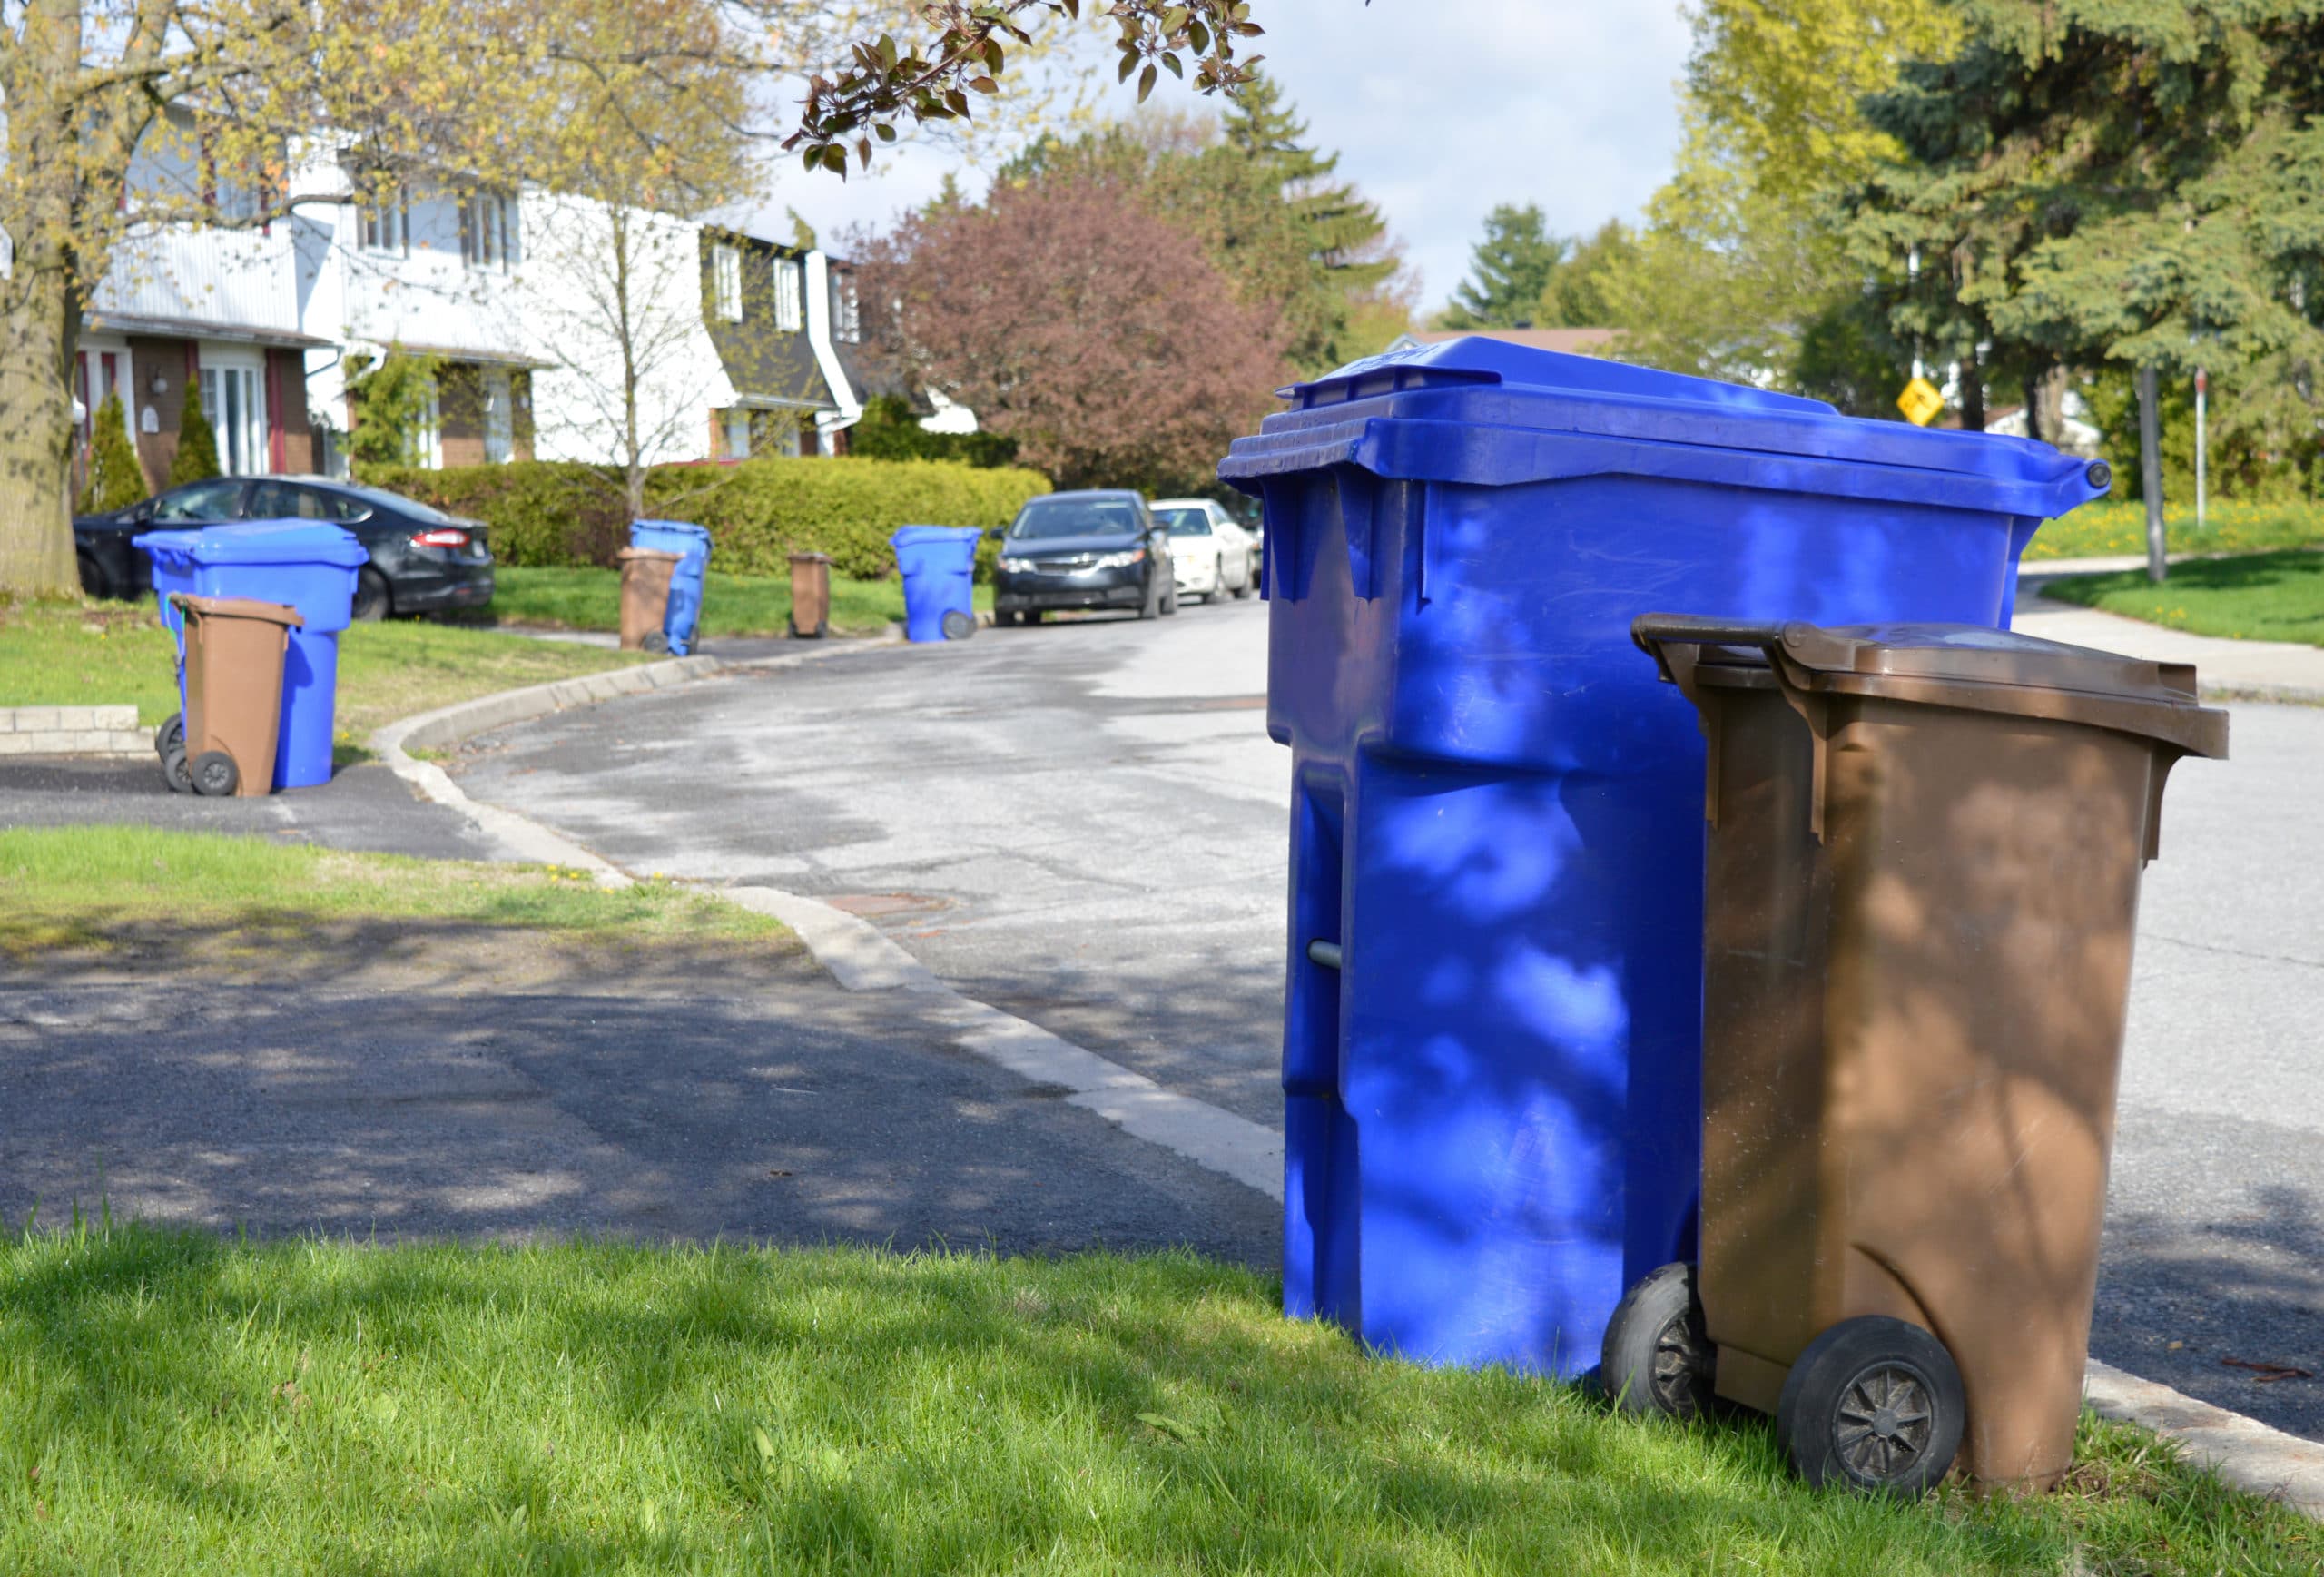 Recycle bins and compost bins line a street awaiting collection from the city